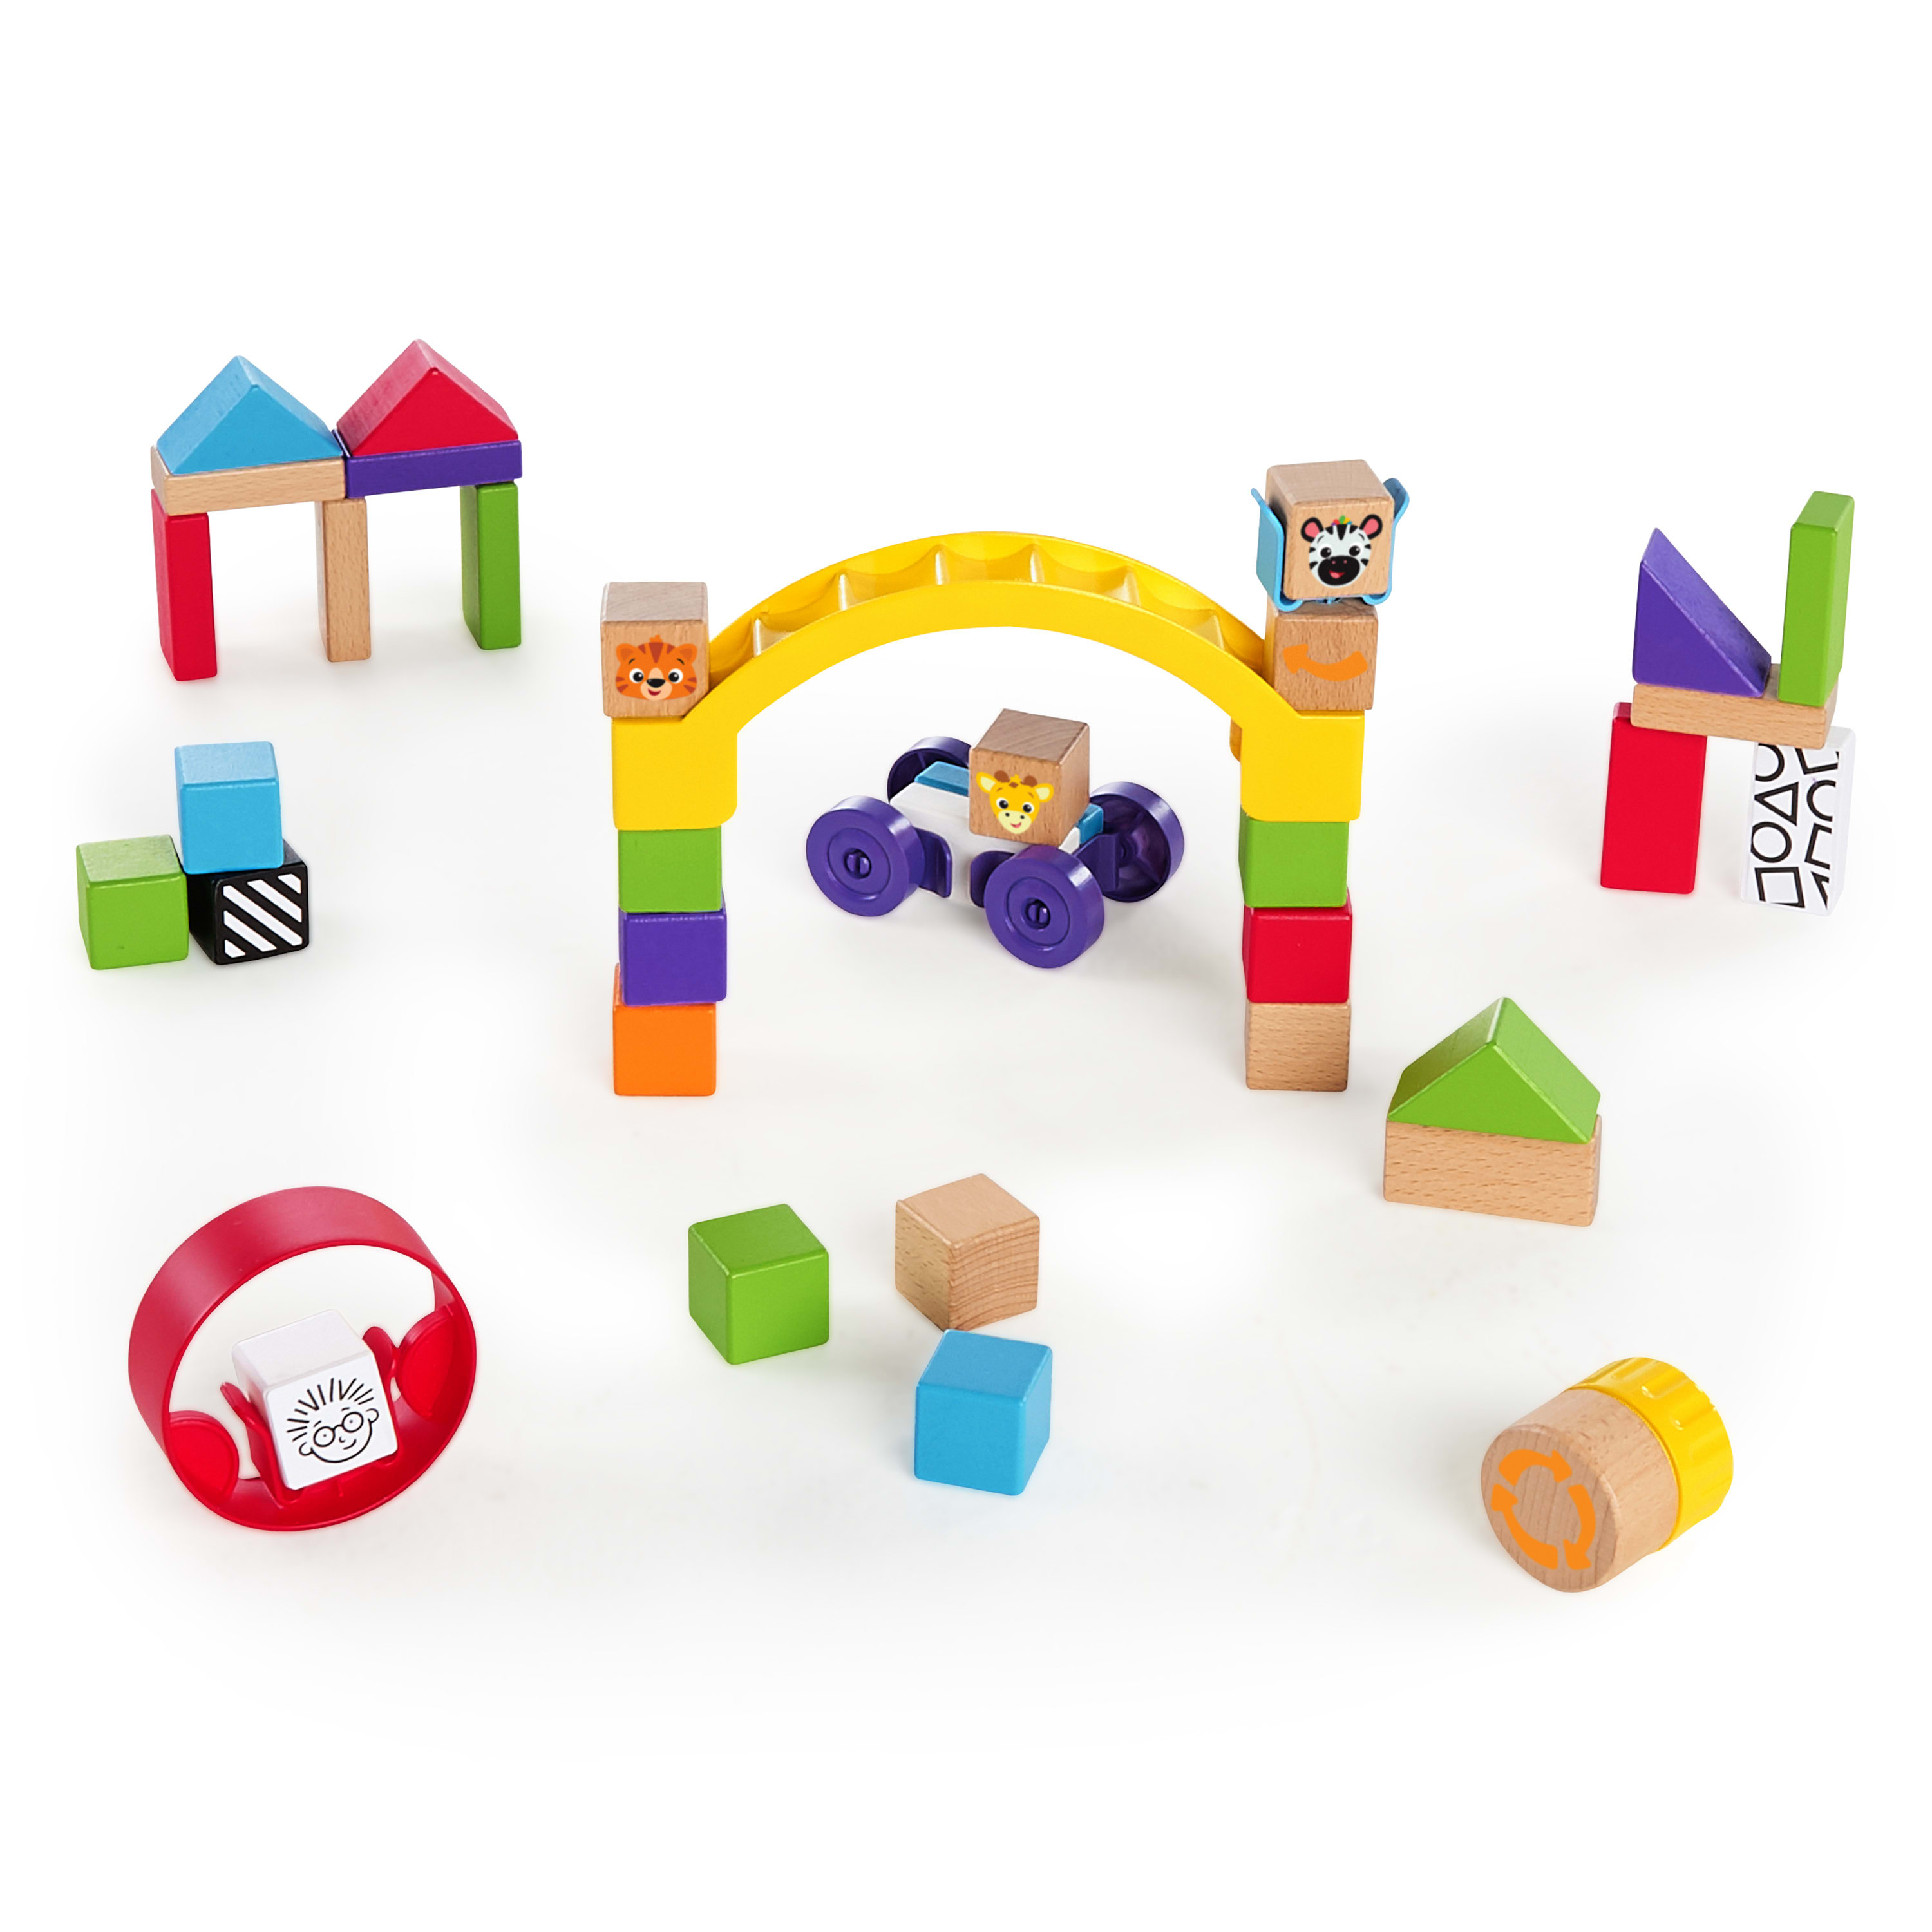 Baby Einstein Curious Creator Kit Wooden Blocks Discovery 40 Piece Toy Set, Ages 12 months + - image 4 of 17